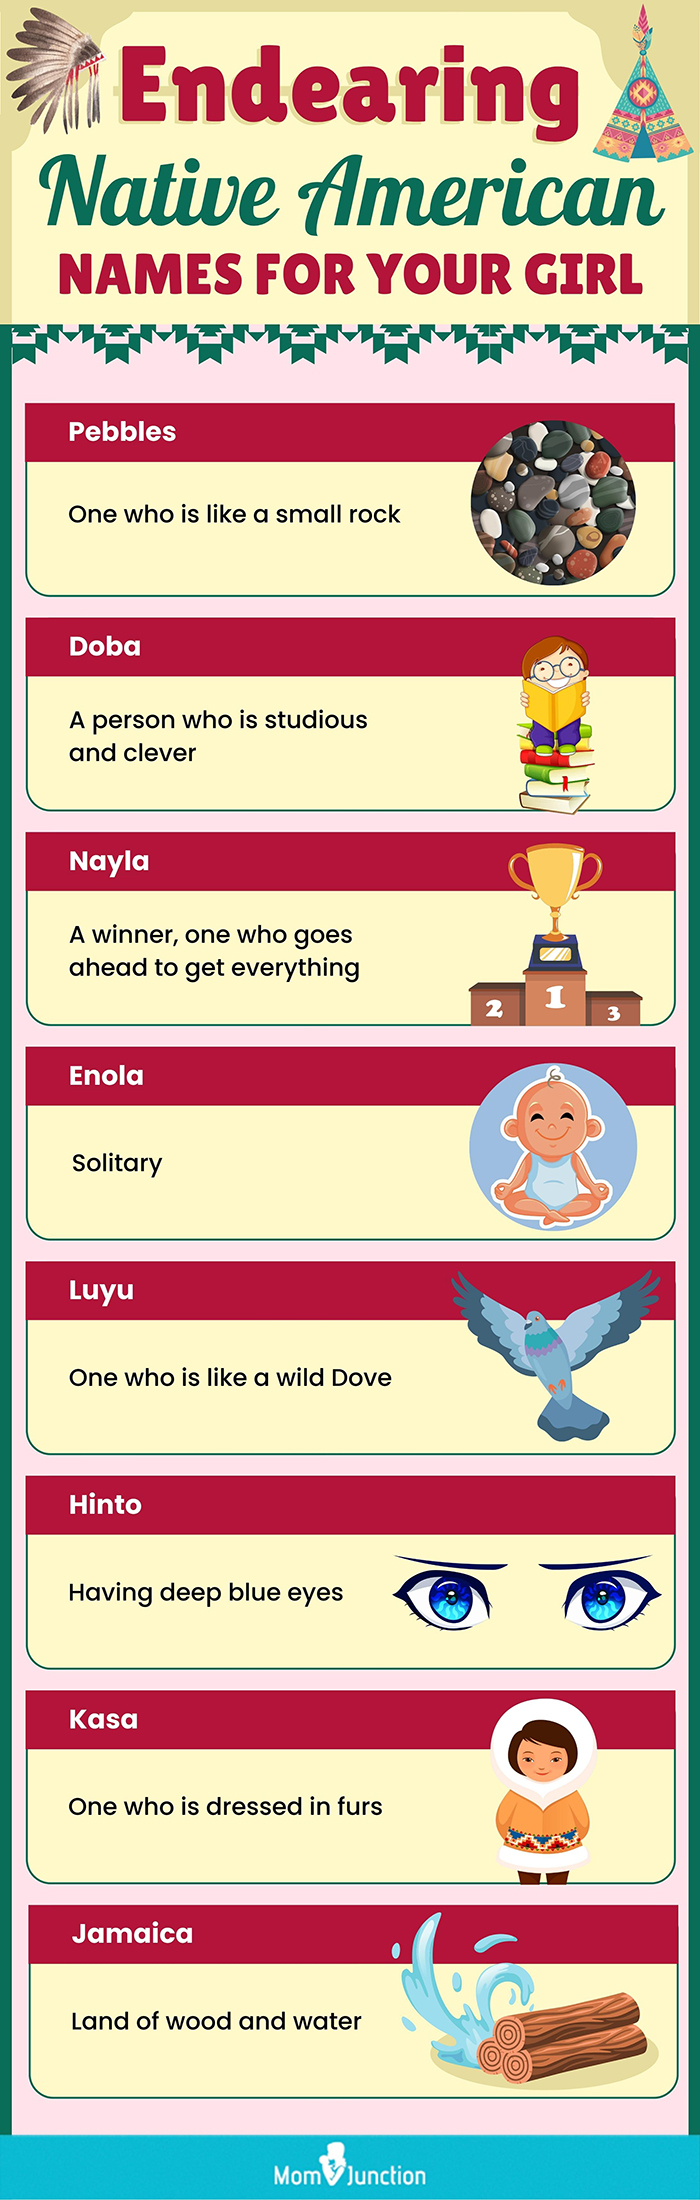 endearing native american names for your girl (infographic)